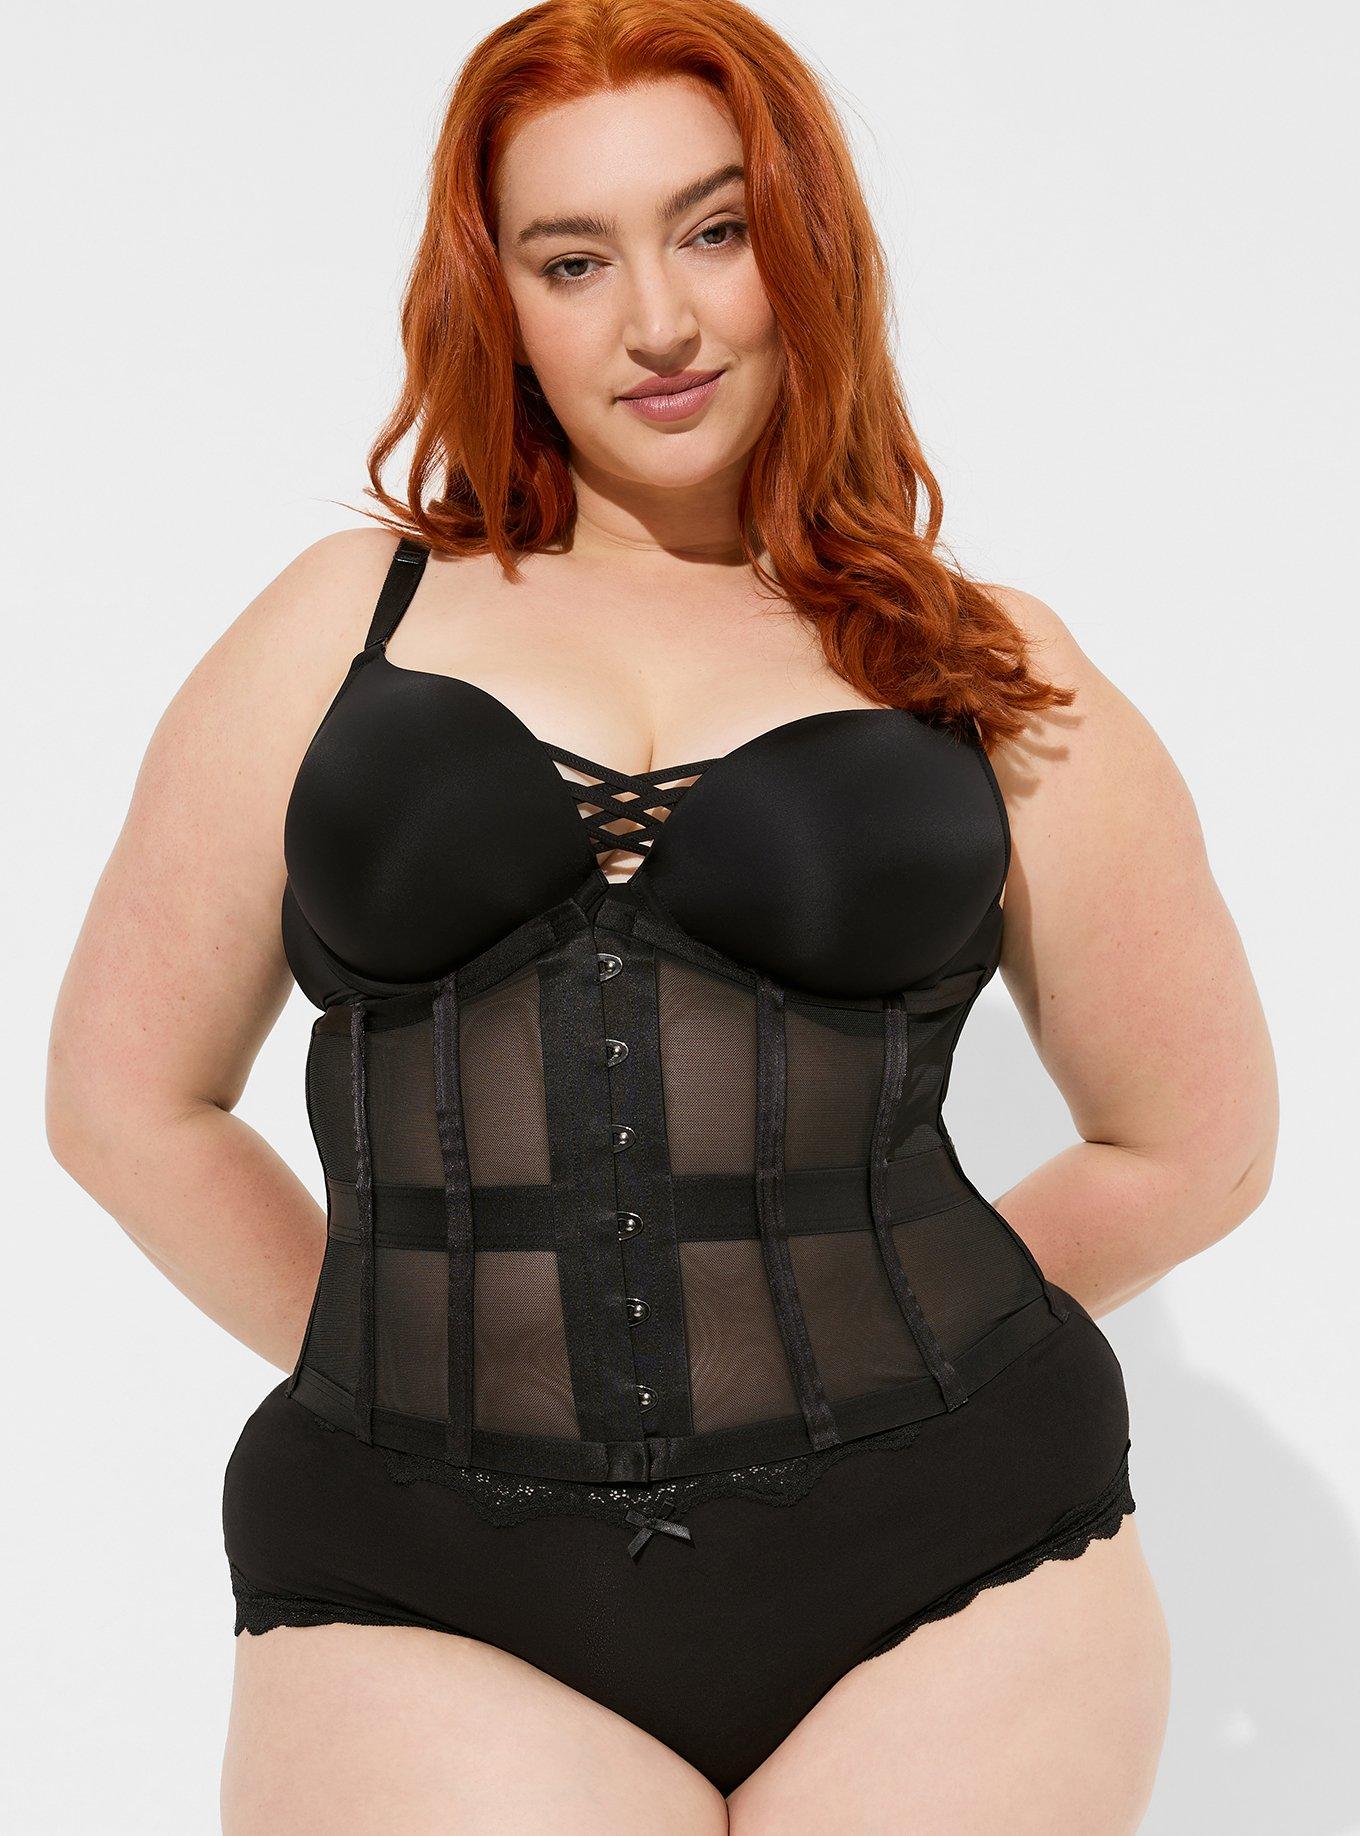 13 Best Plus Size Corsets & Bustiers To Seriously Upgrade Your